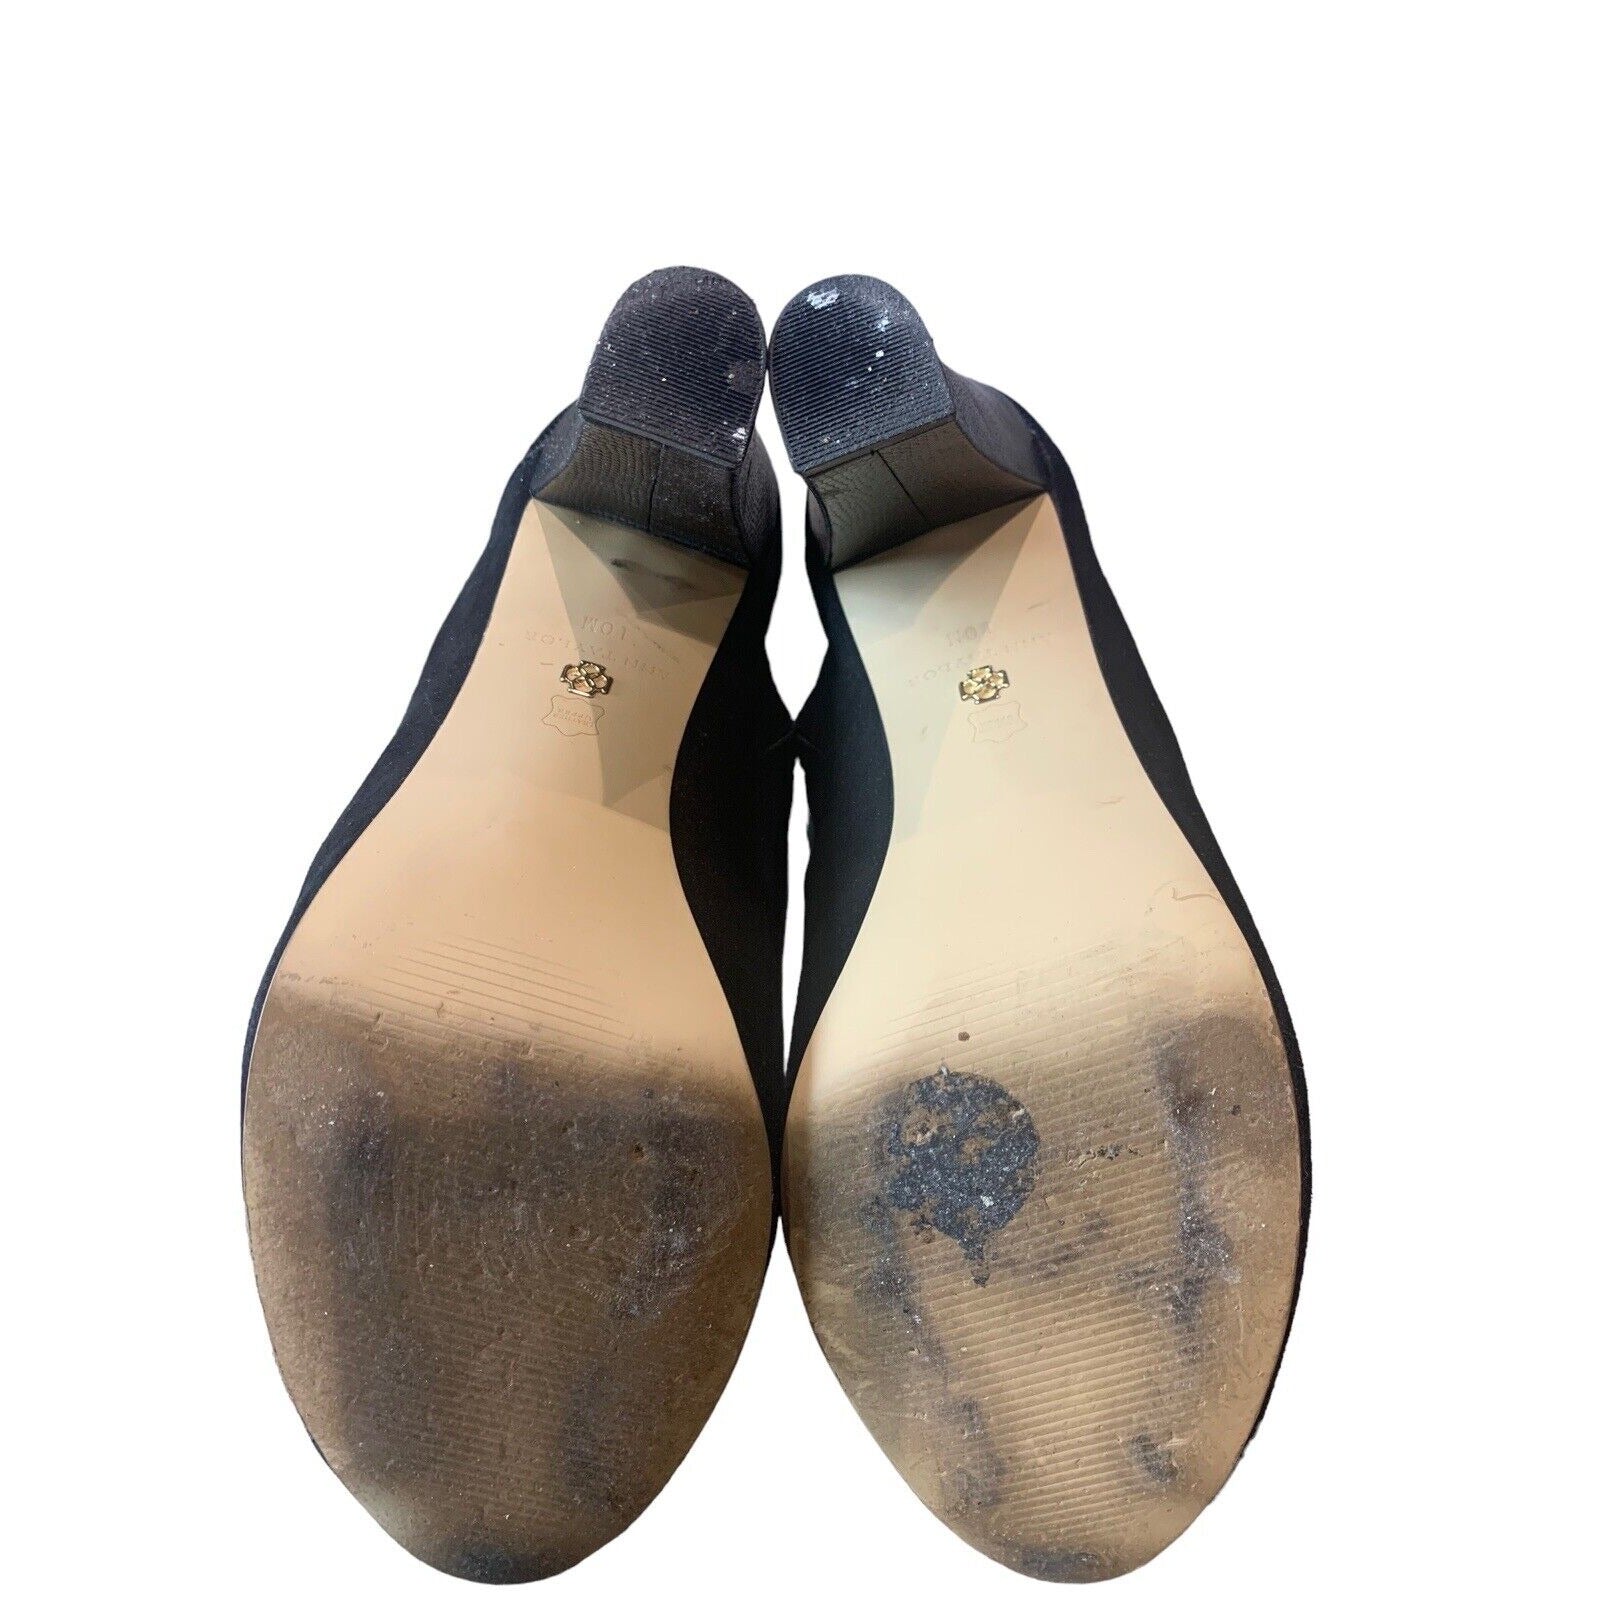 view of shoe soles on white background